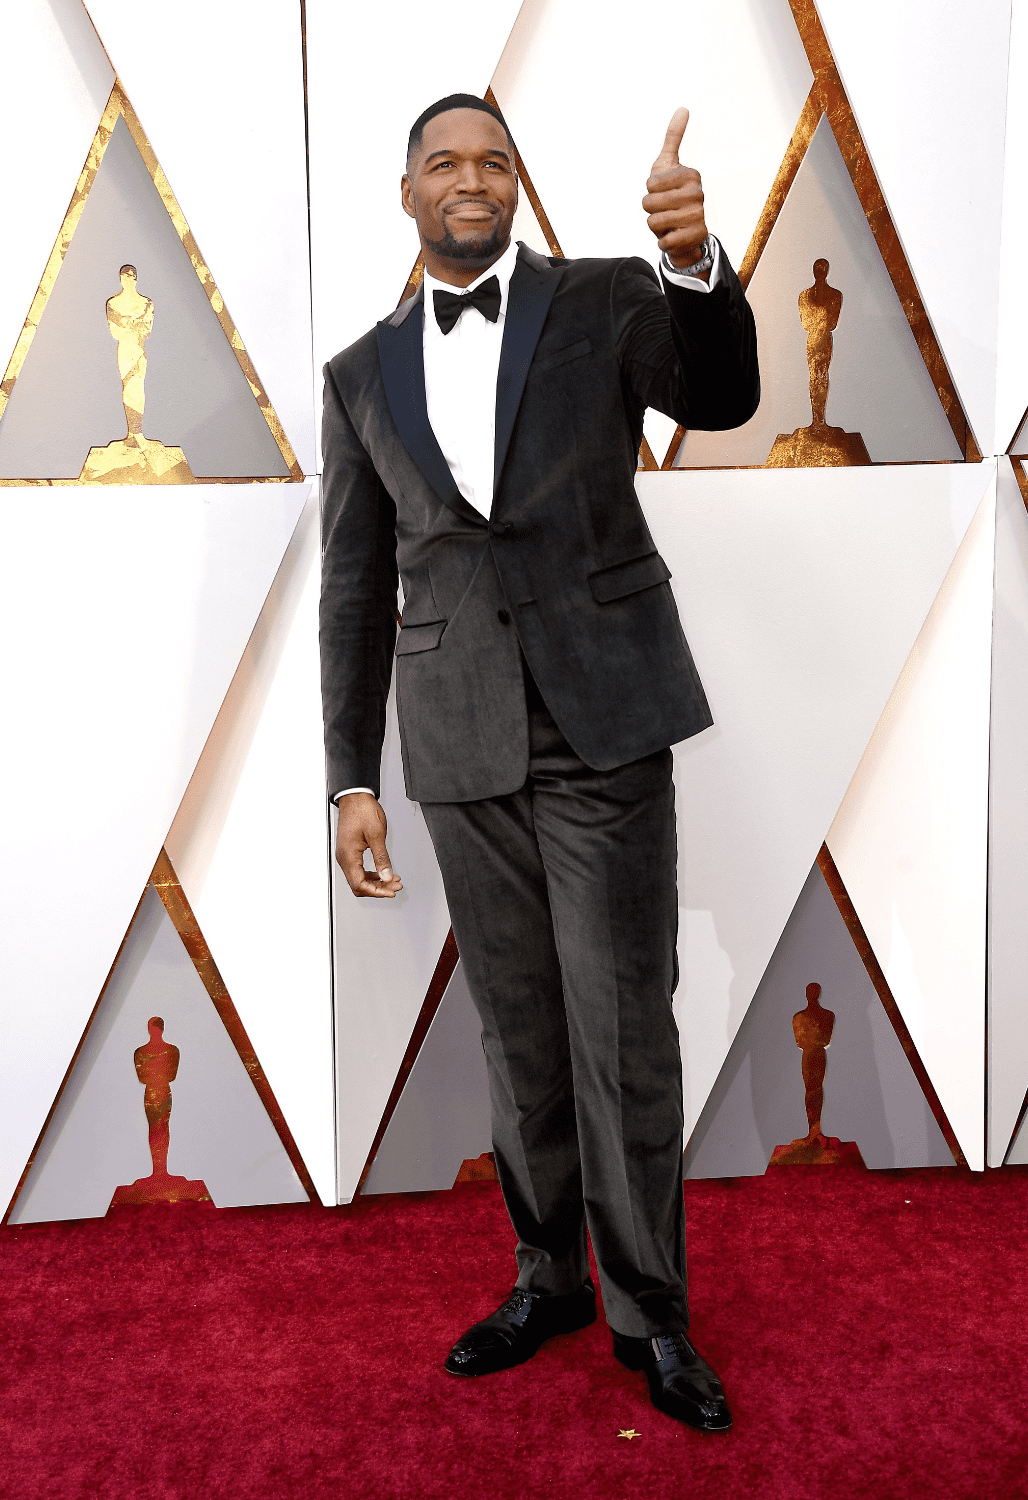 Michael Strahan arrives at the 90th Annual Academy Awards on March 4, 2018 in Hollywood, California. | Photo: Getty Images